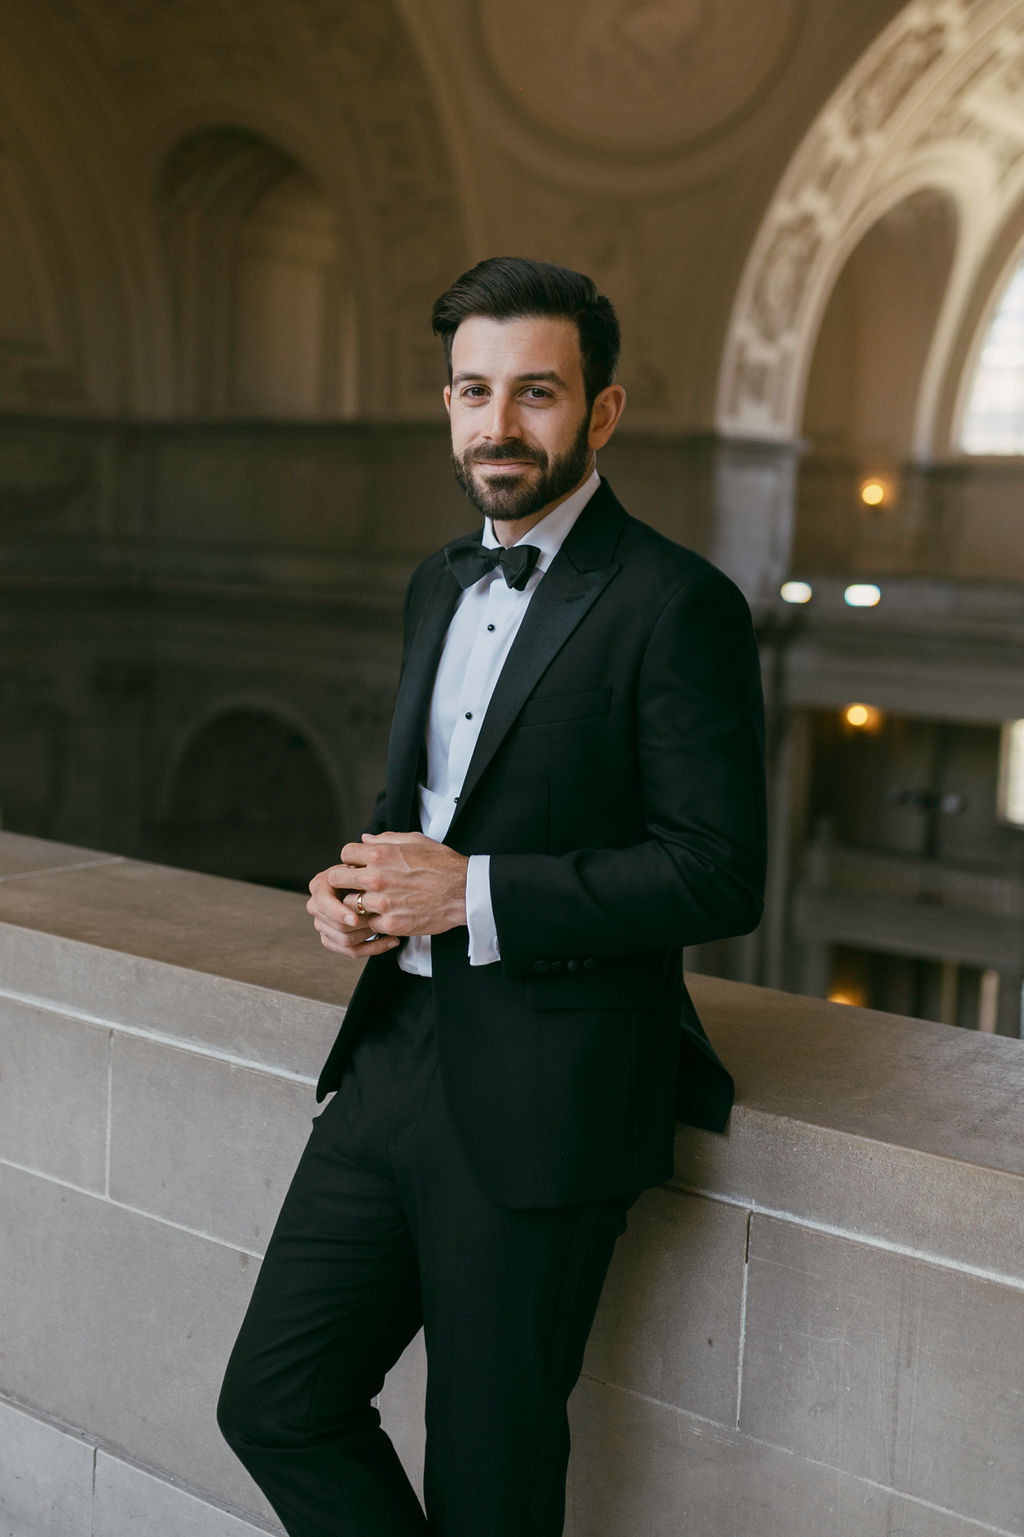 groom posing in a city hall for his wedding photos